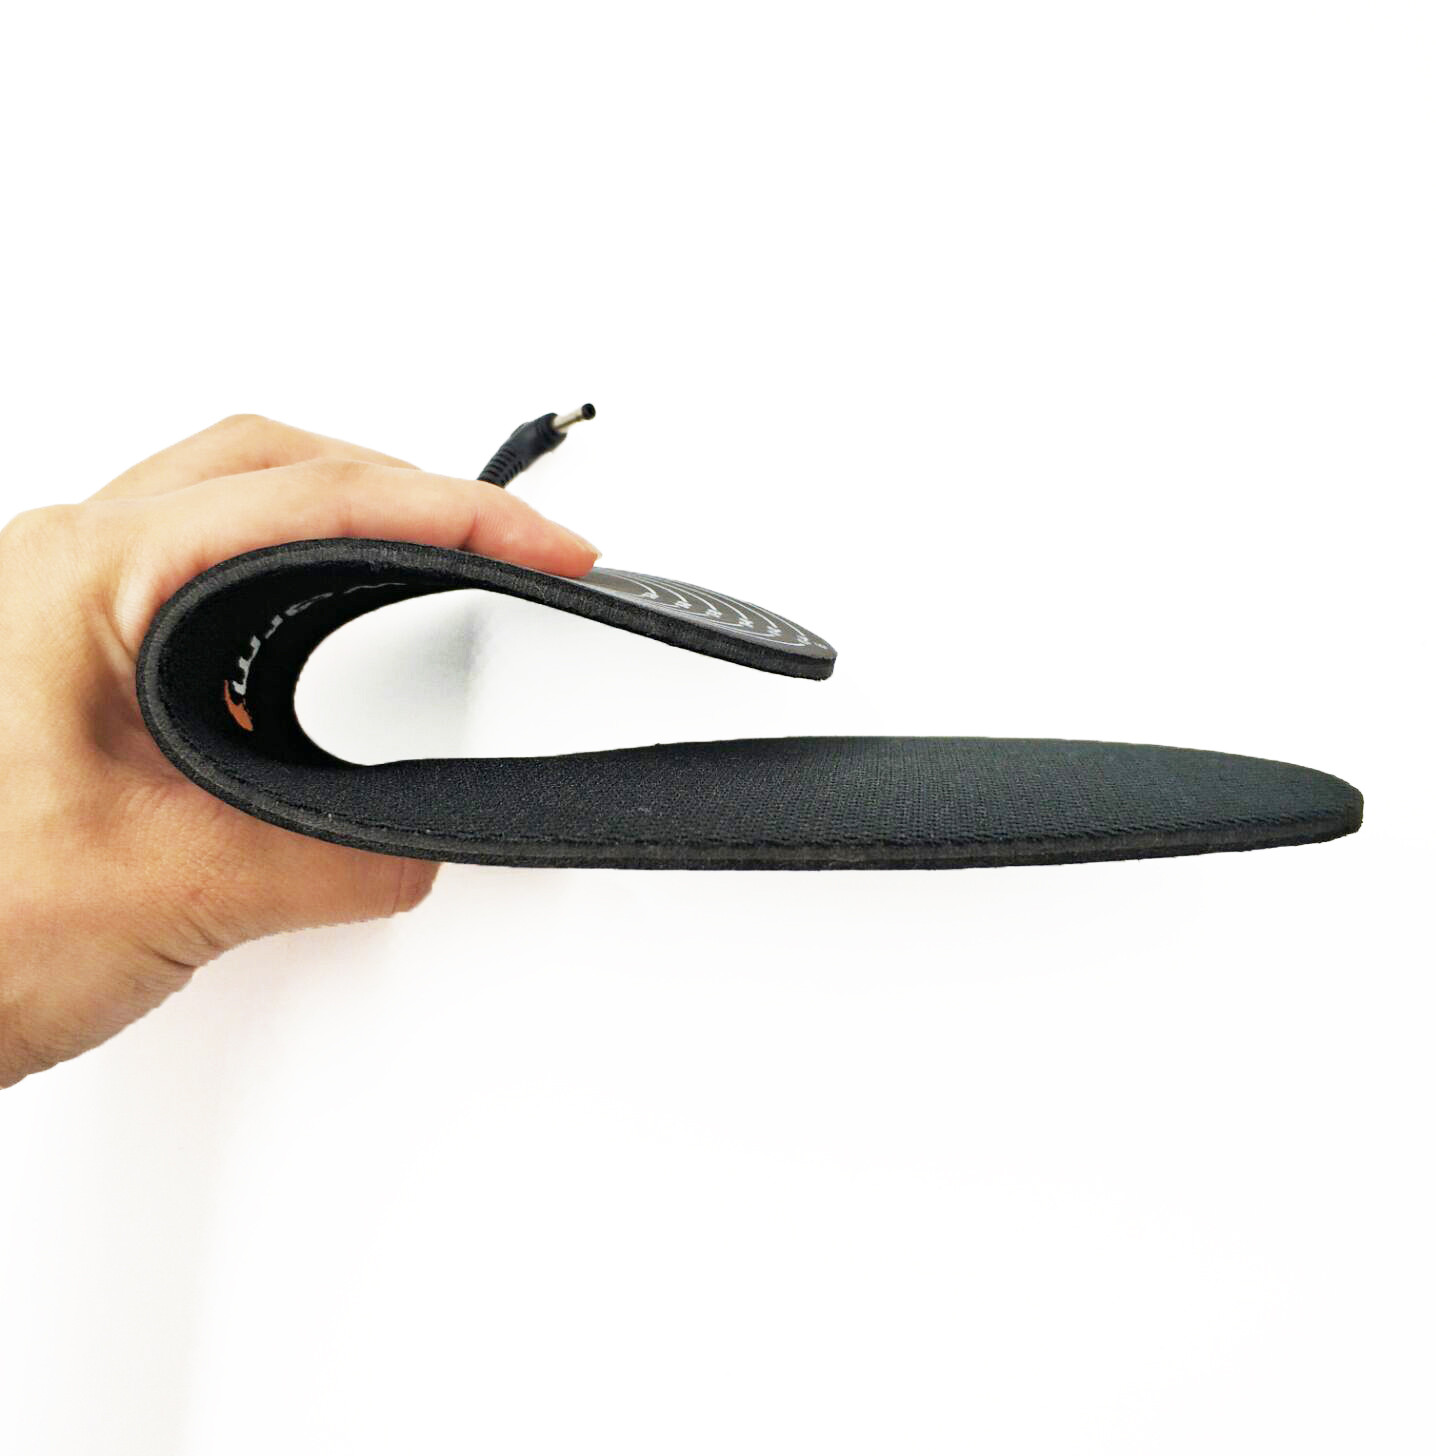 Dr. Warm winter battery operated insoles lasts for 3-7hours for home